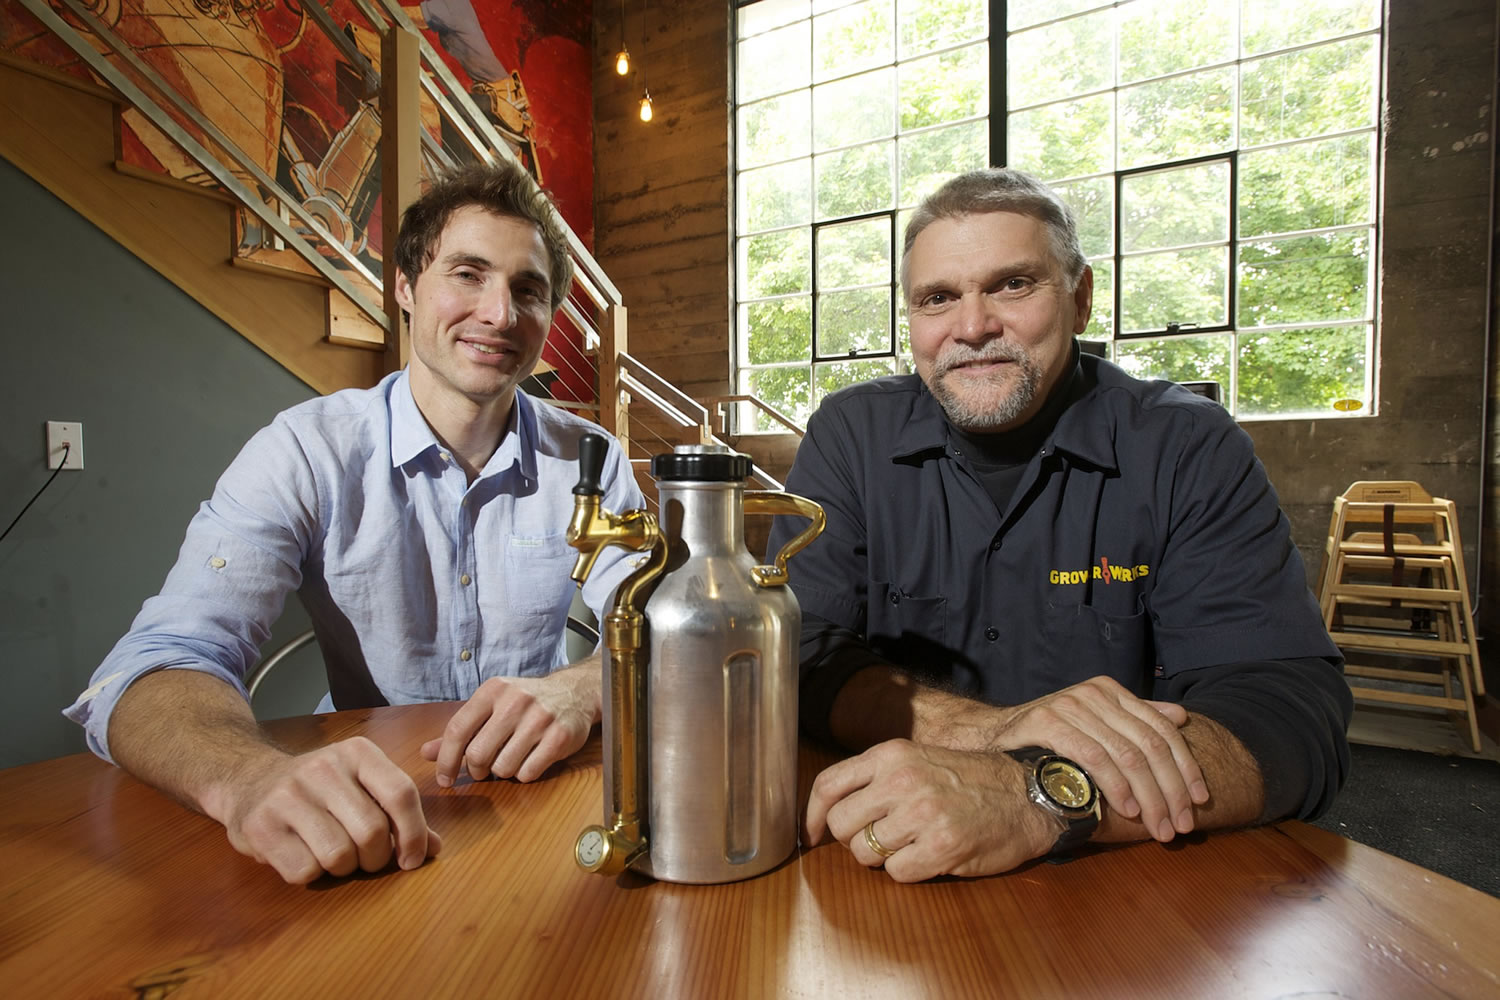 Photos by Steven Lane/The Columbian
Founders Shawn Huff, left, and Chris Maier have launched GrowlerWerks, which has developed a custom beer growler called uKeg to keep beer fresh and cold. Maier, a Camas resident, is the company's CEO.